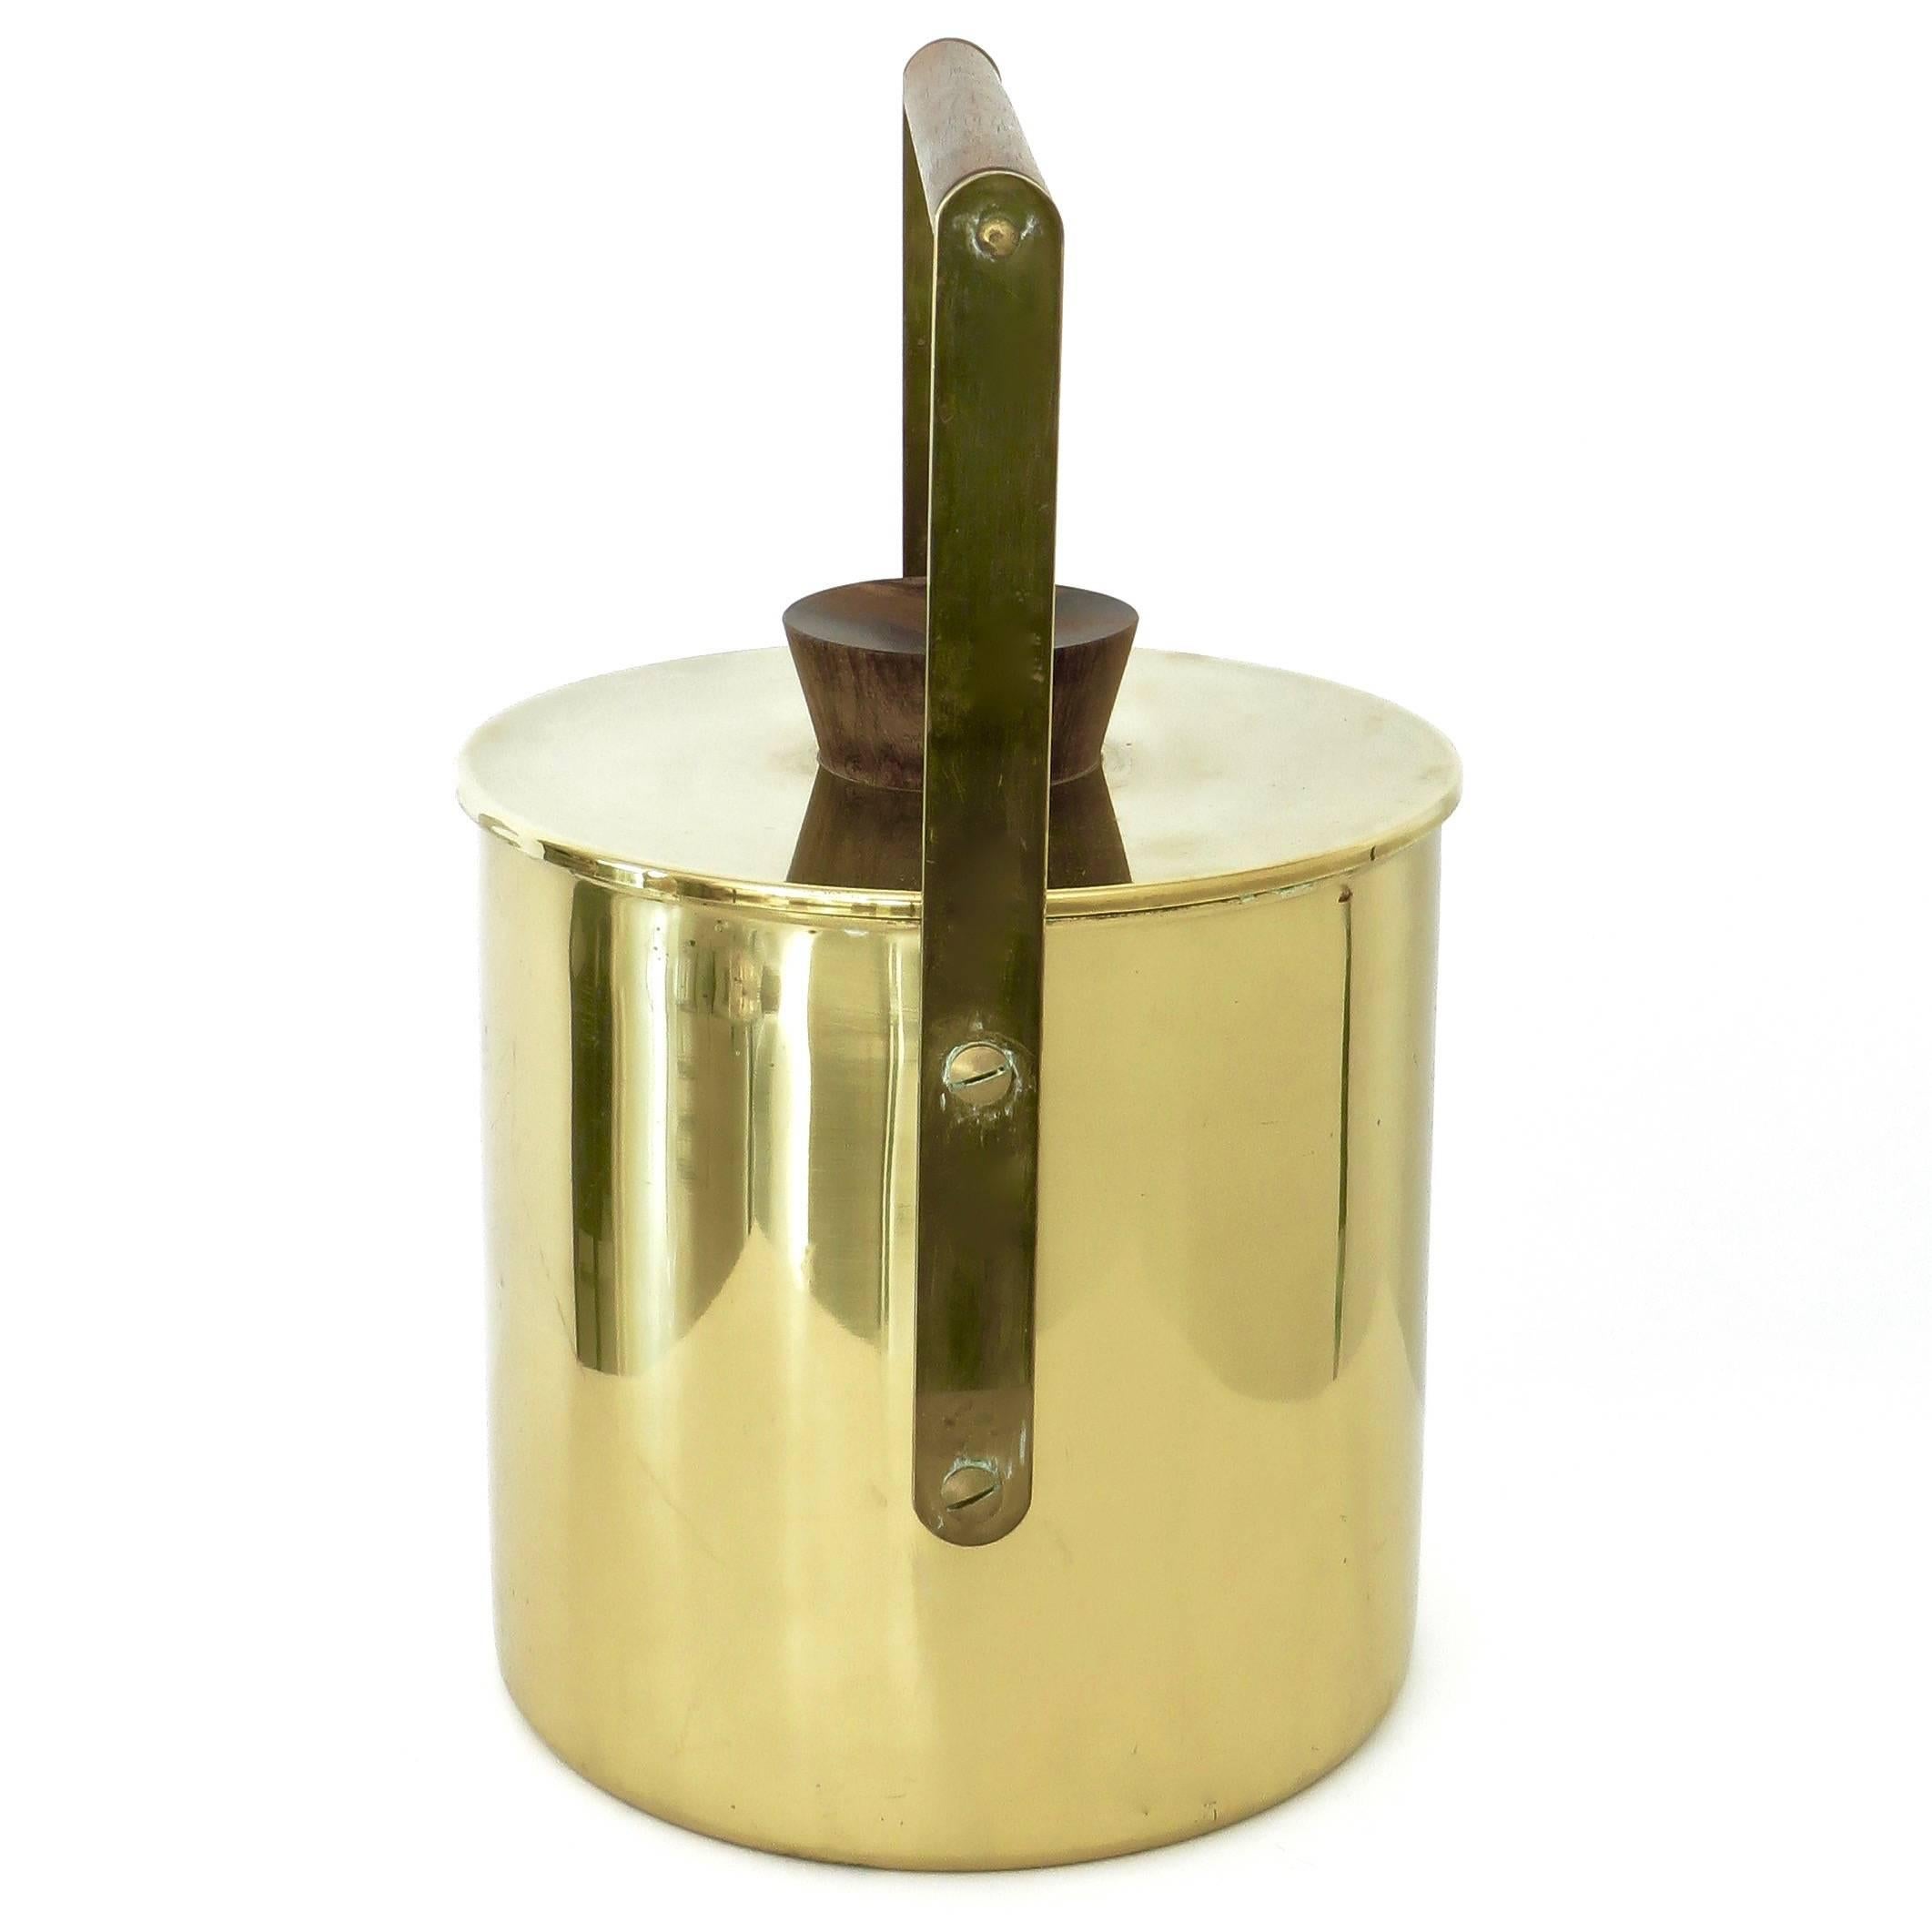 An Italian vintage modernist style polished brass ice bucket with white perfect condition liner and walnut handle and walnut pull top.
Stamped, made in Italy.
Maker unknown.